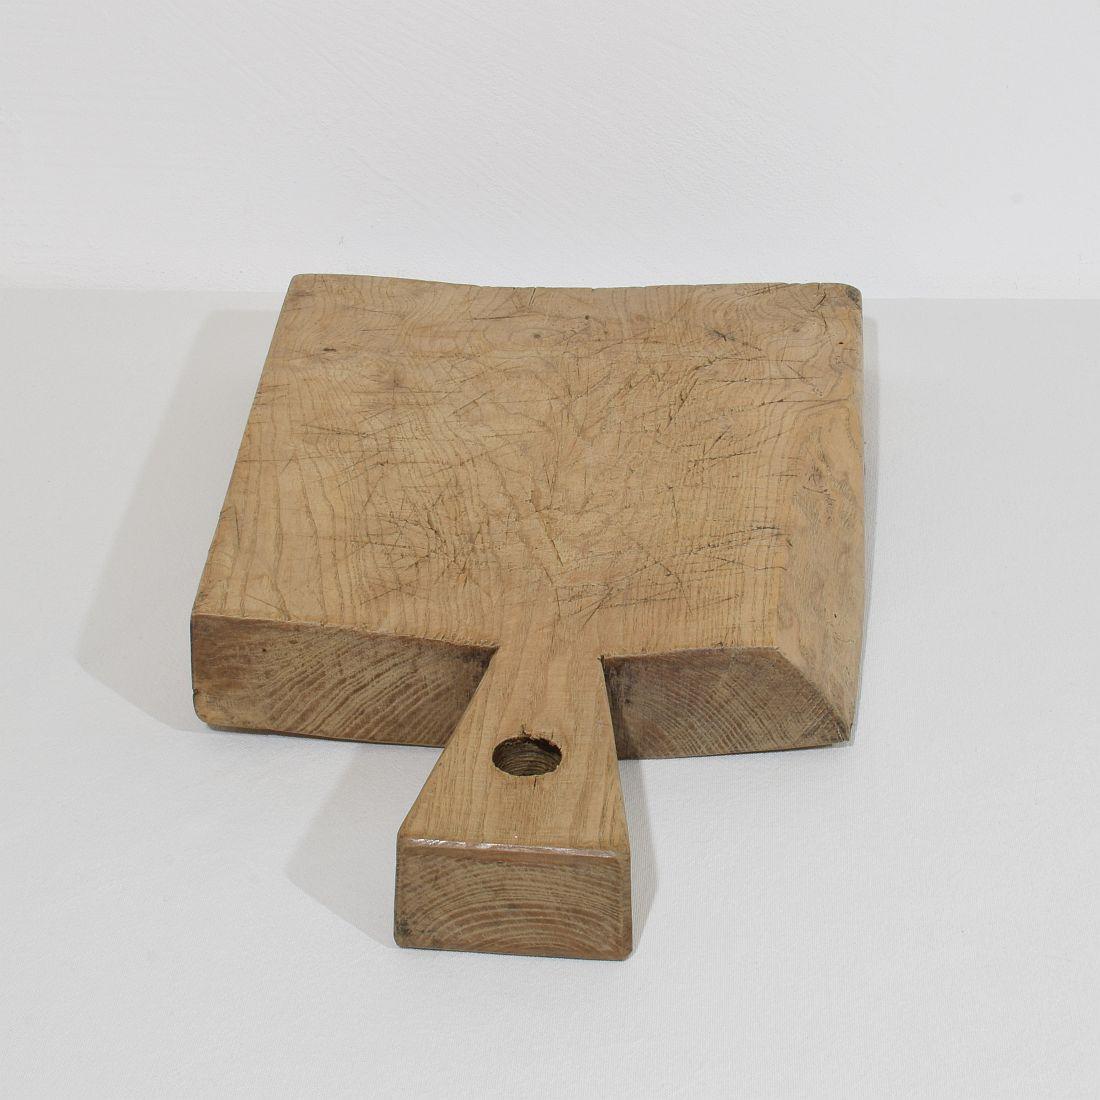 French 19th Century, Wooden Chopping or Cutting Board For Sale 7